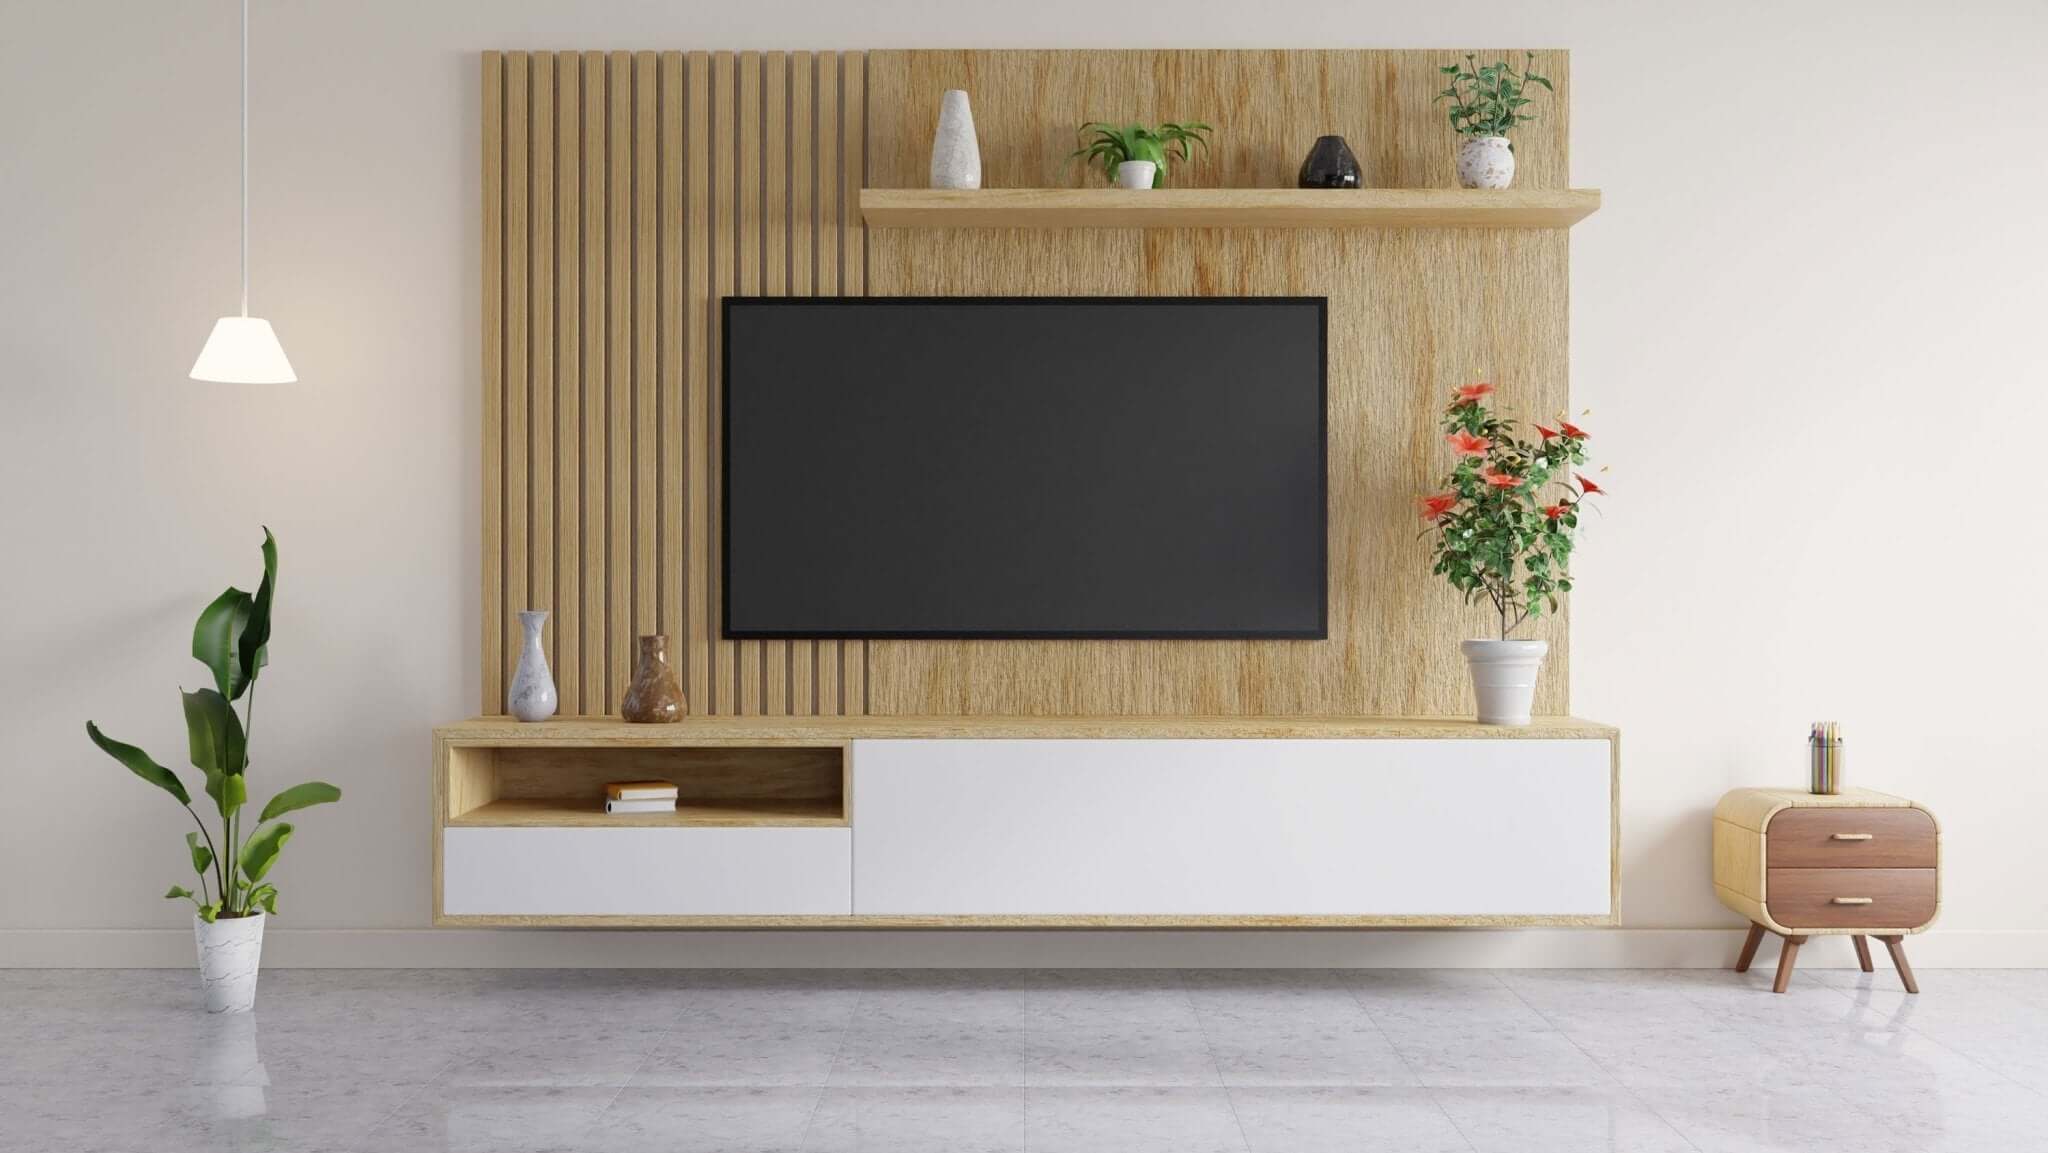 How to Decorate Around Your Wall Mounted TV